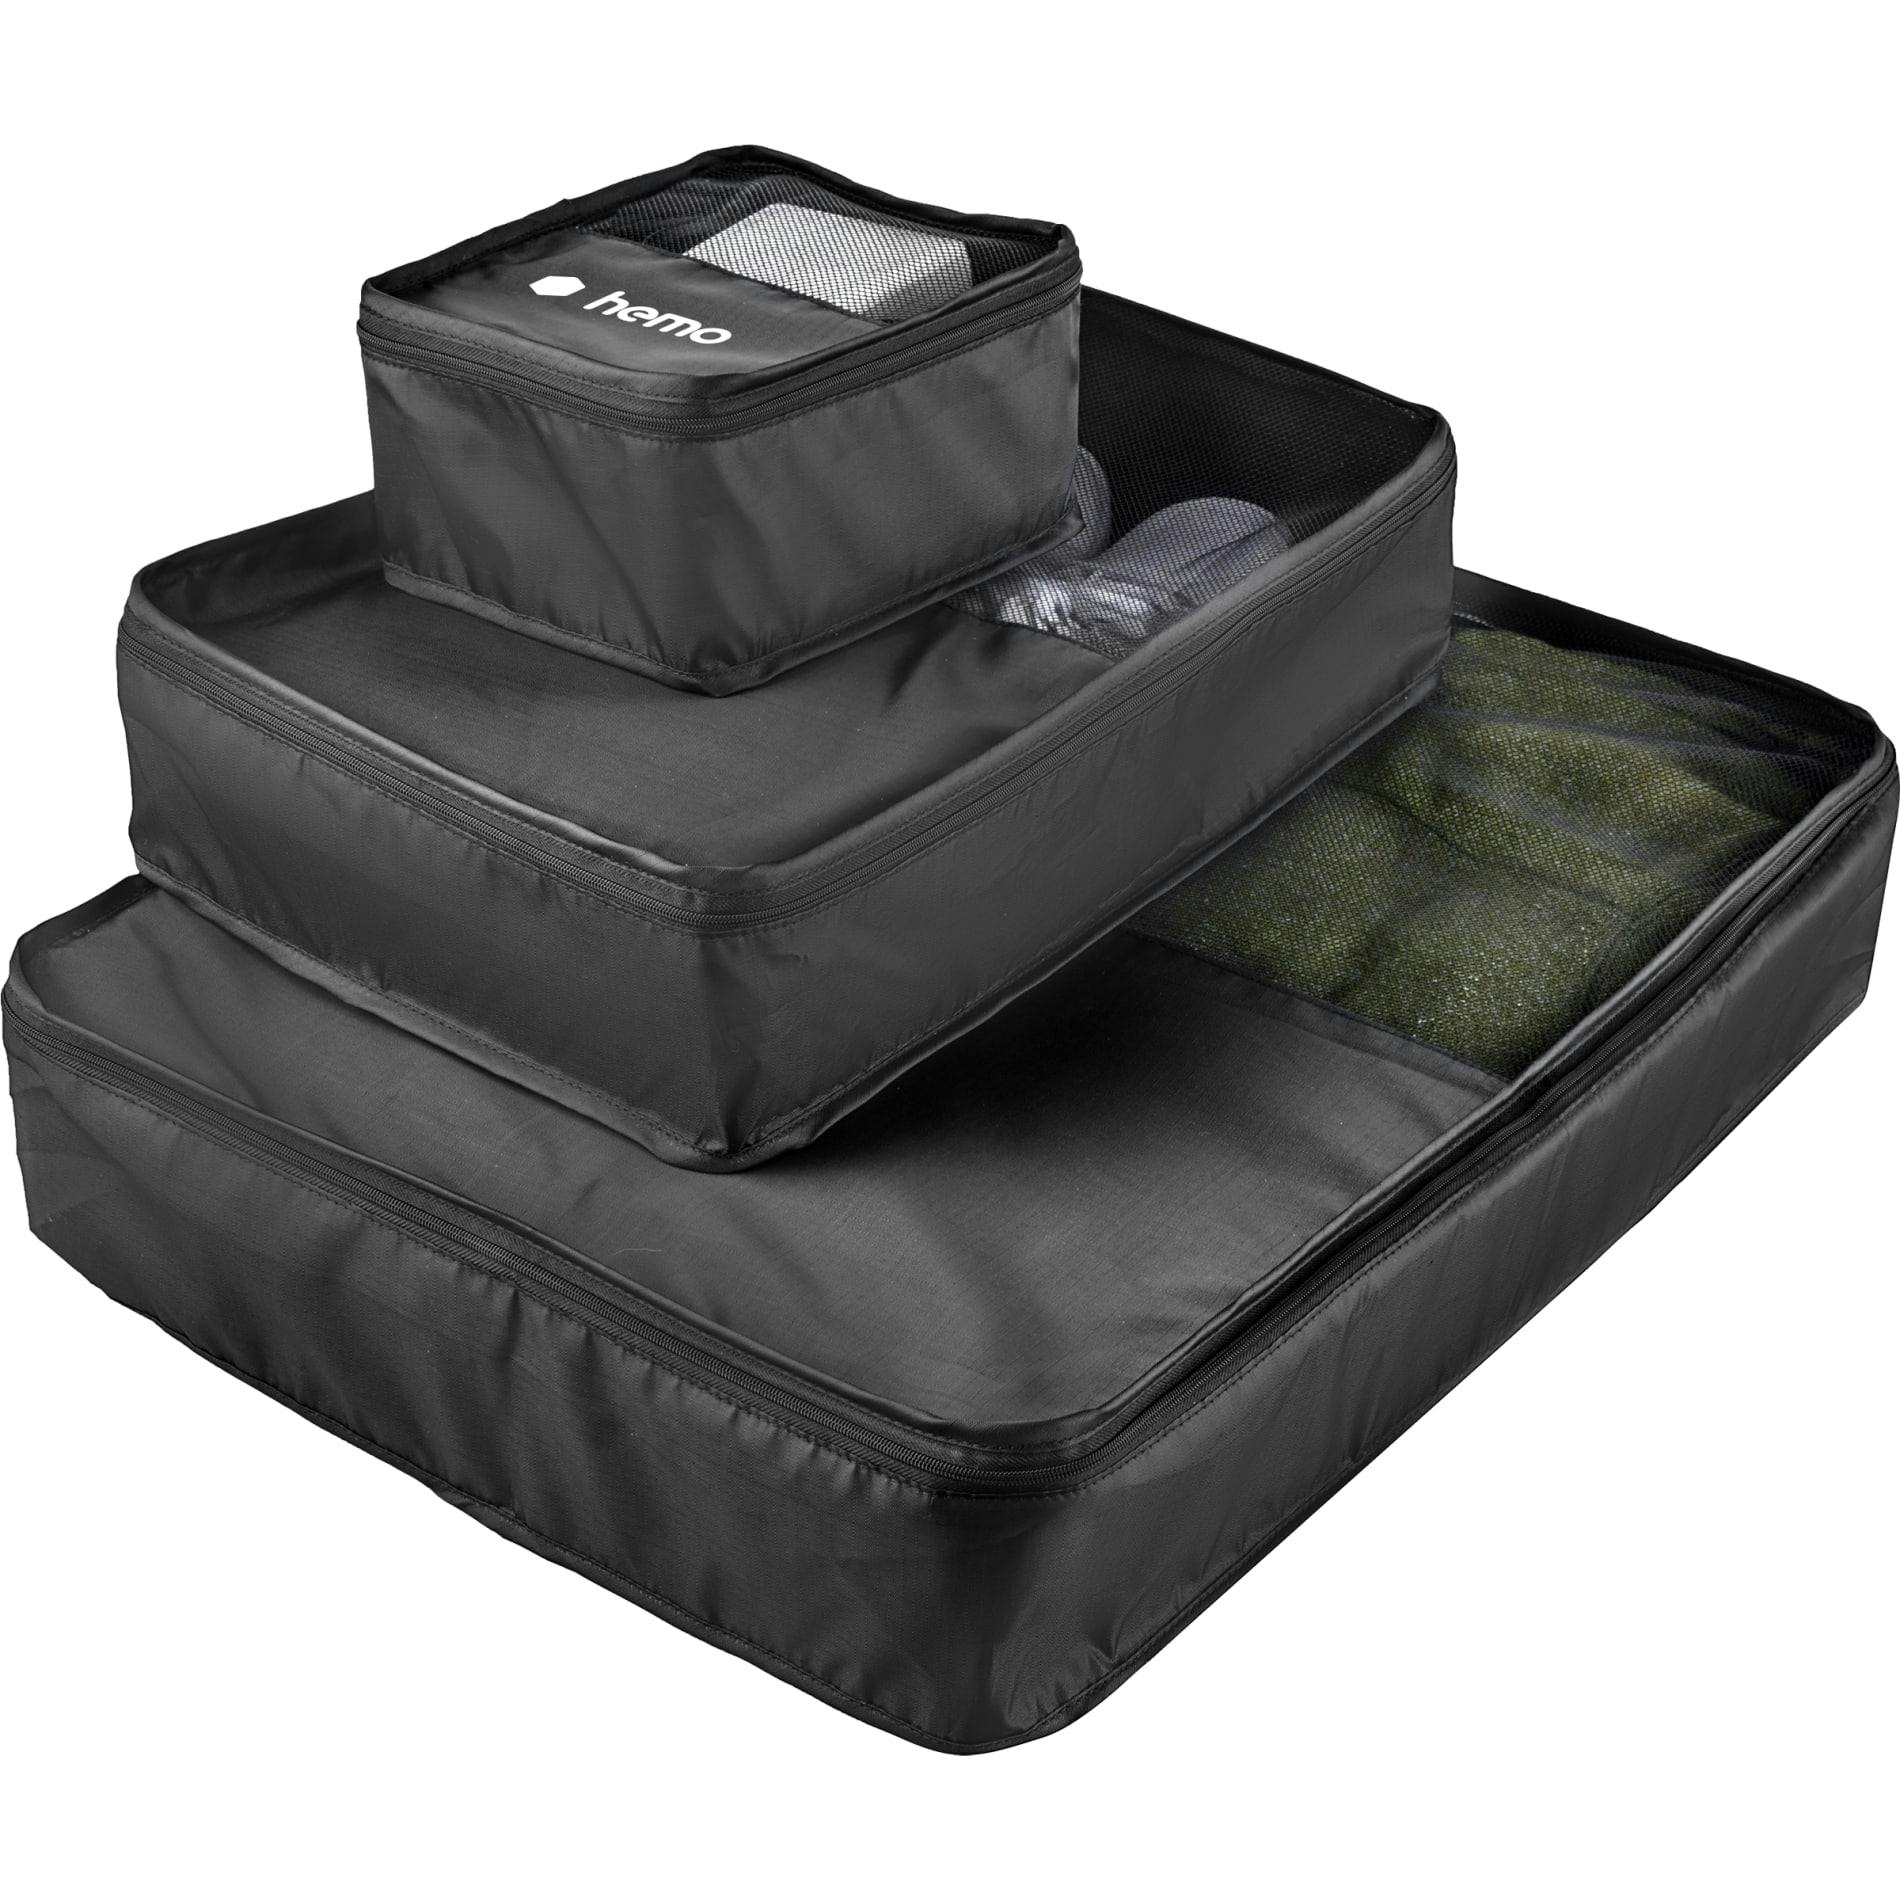 Packing Cubes 3pc Set - additional Image 1